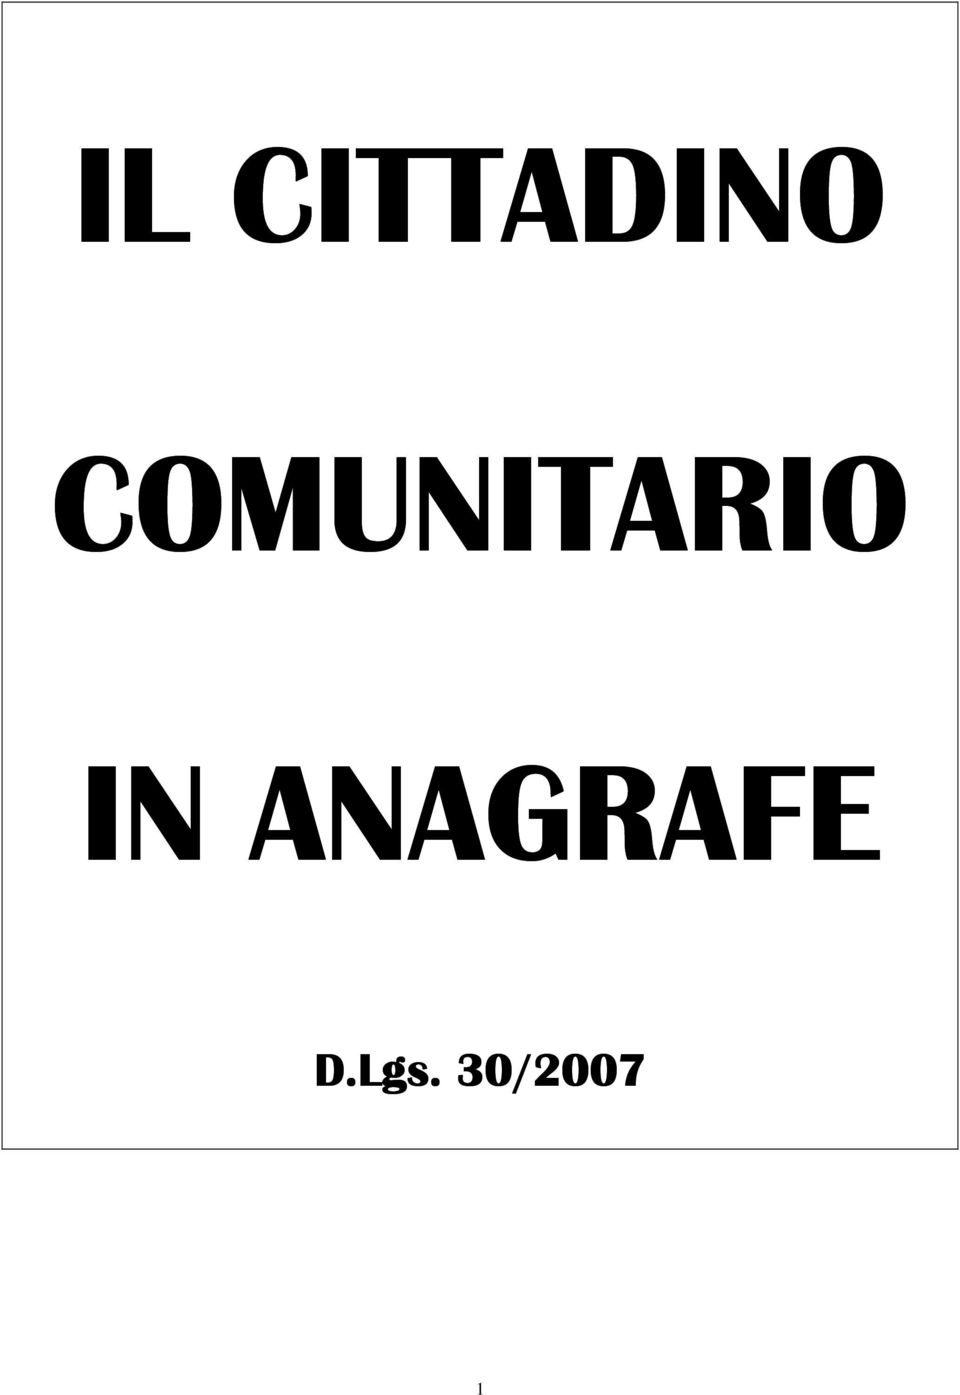 IN ANAGRAFE D.